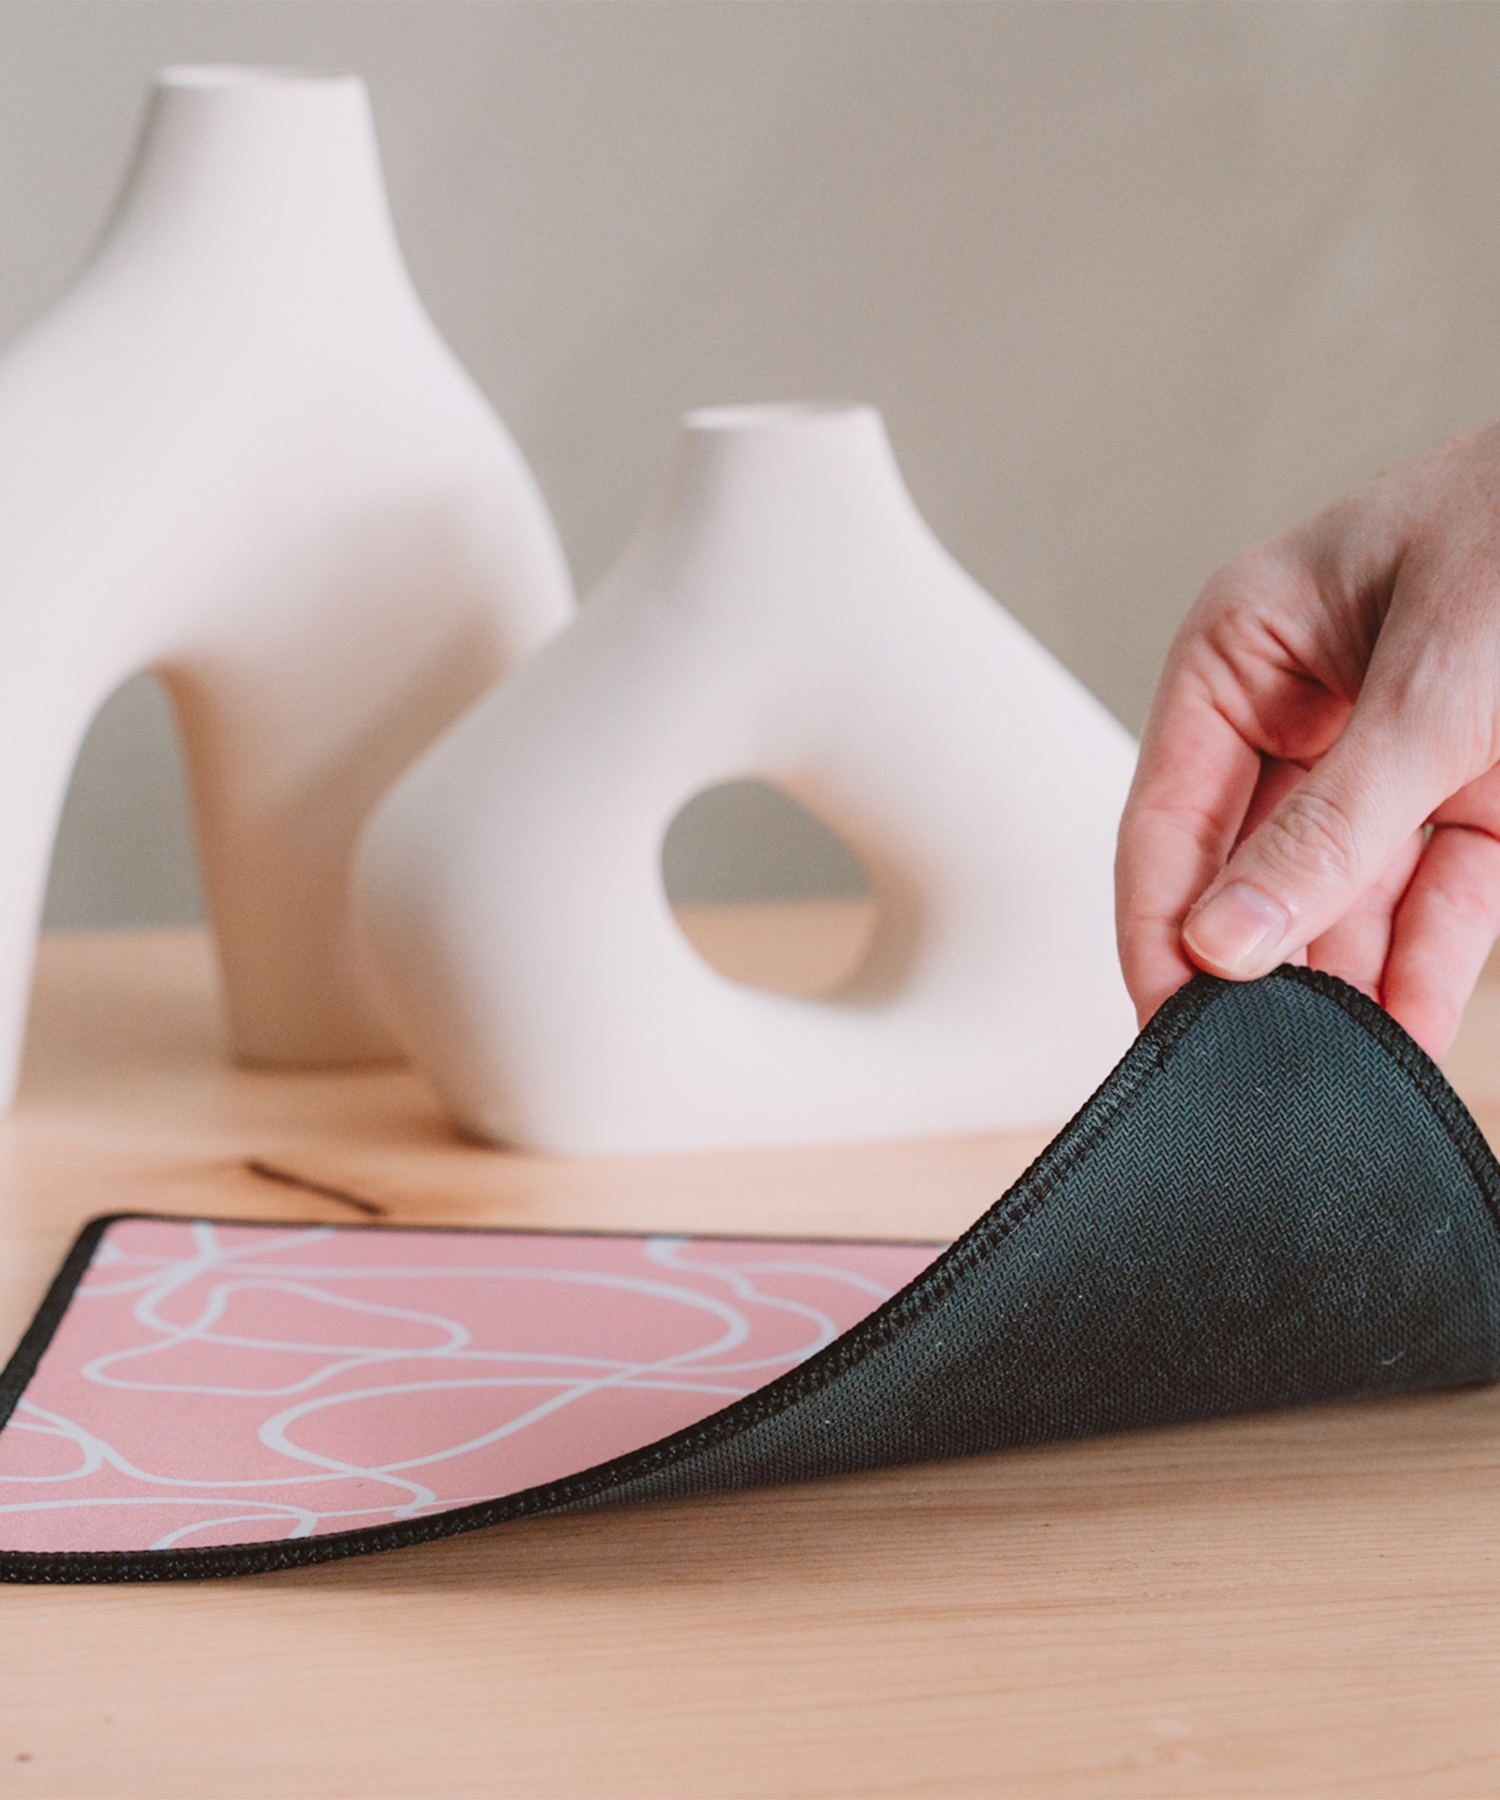 A hand is lifting up the corner of the Terrain mousepad to reveal the black, anti-slip rubber backing. In the background are two asymmetrical vases.